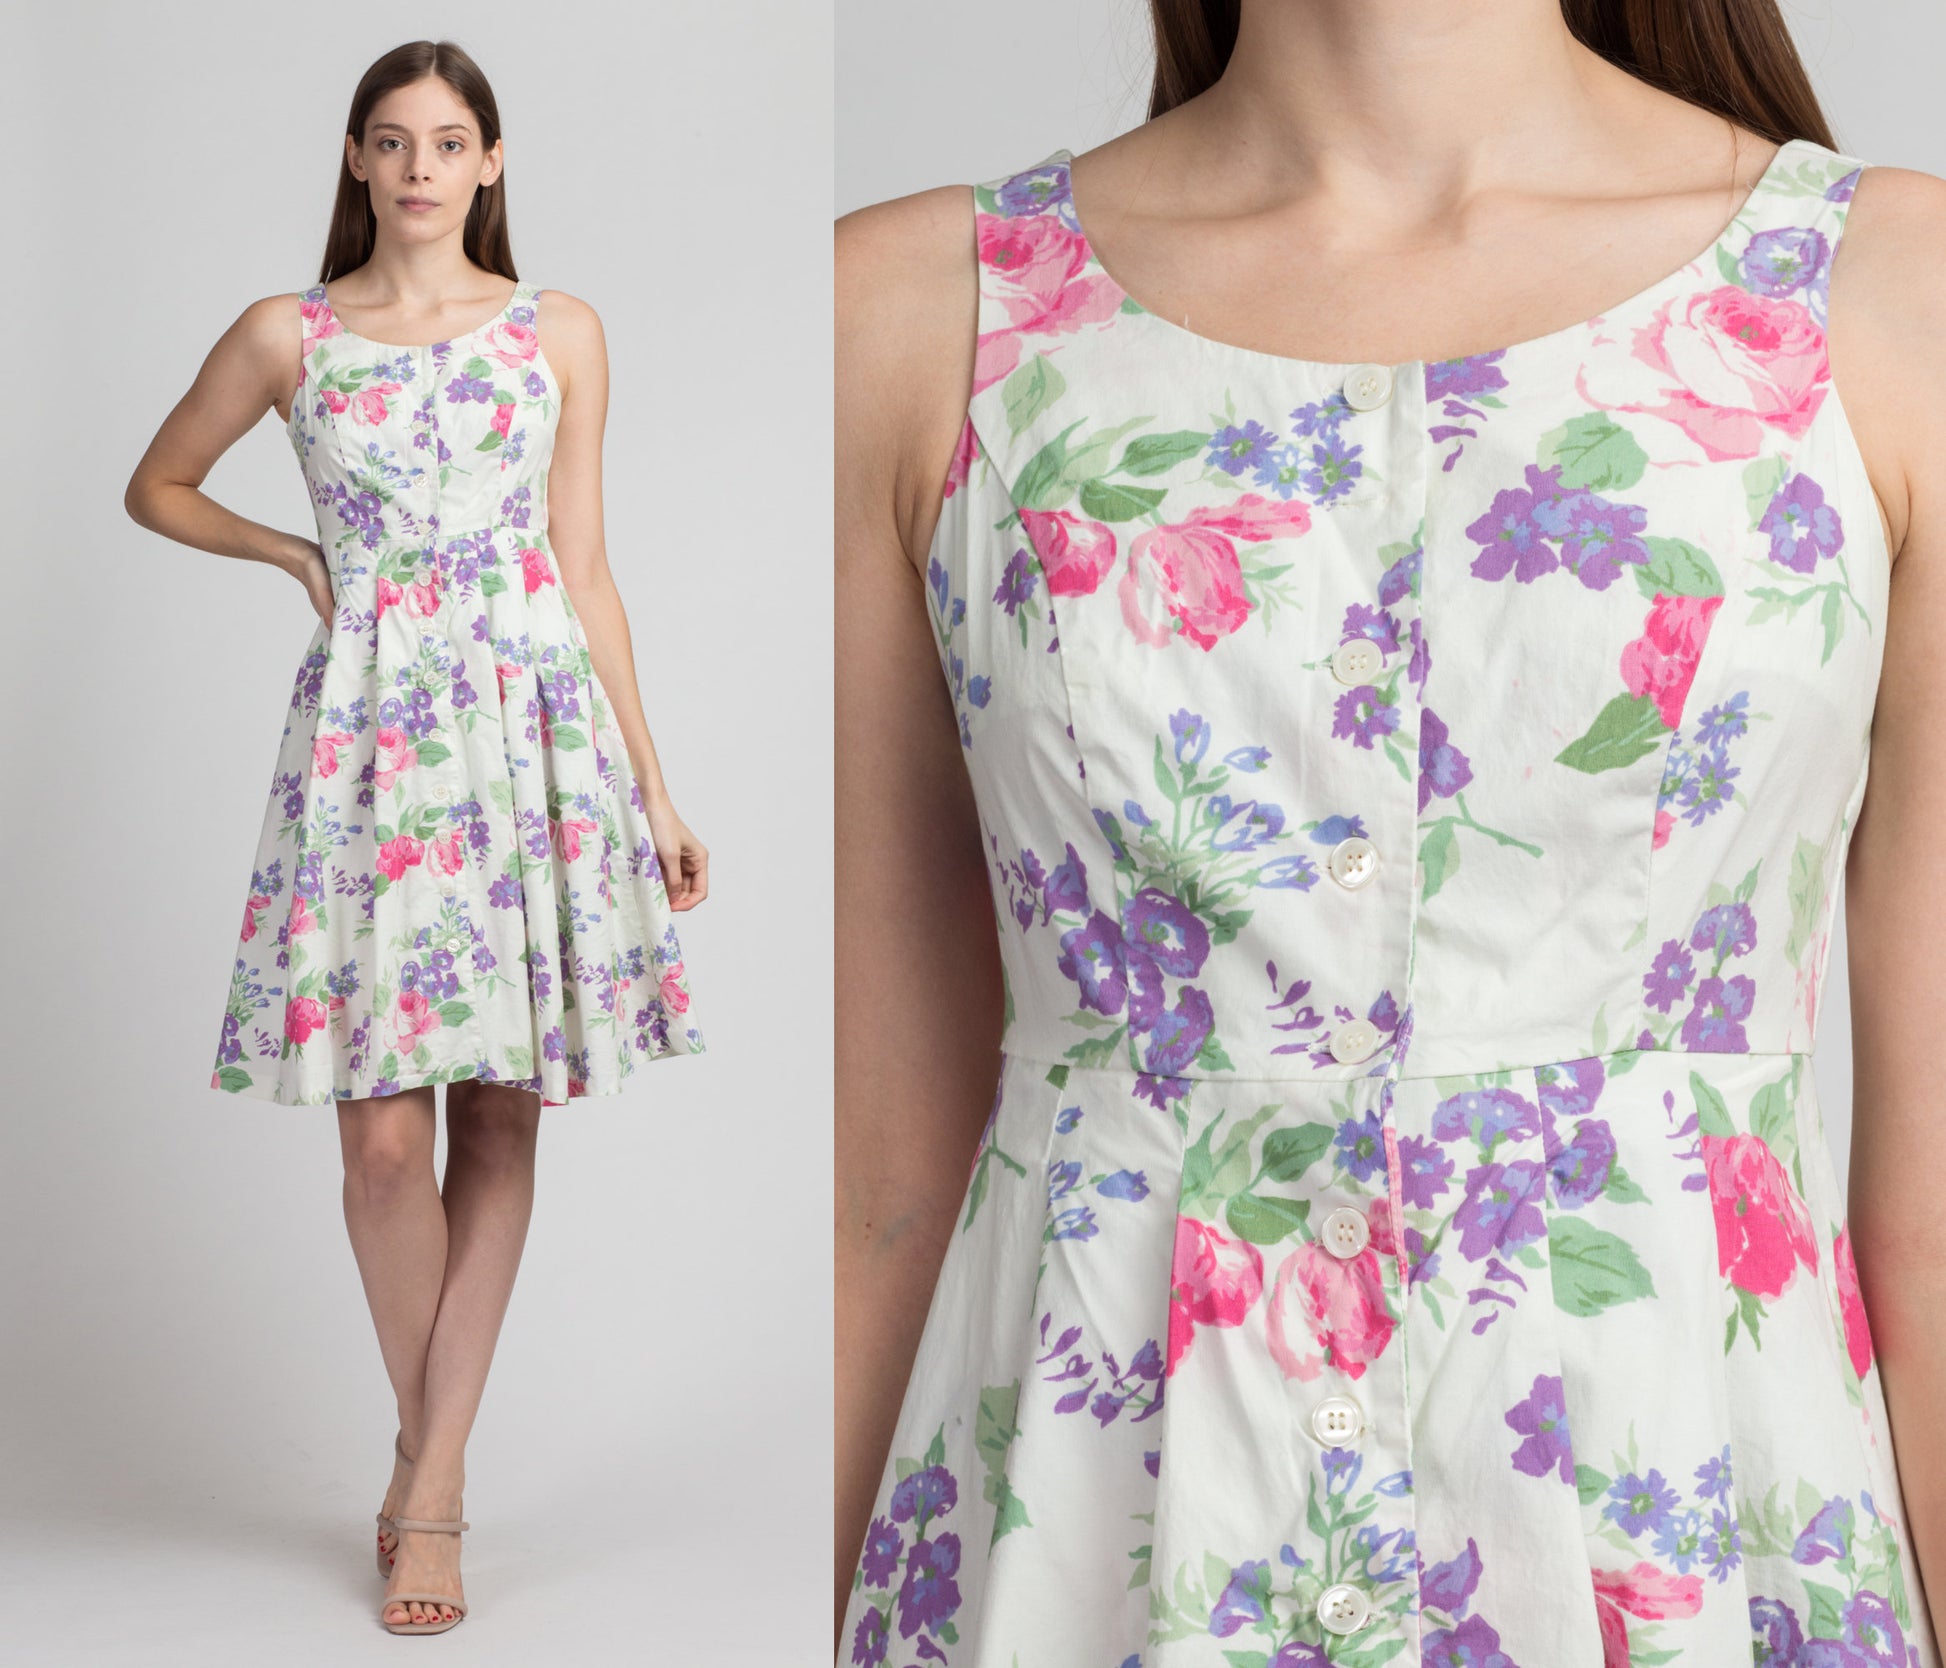 90s White Floral Fit & Flare Dress - XS to Petite Small – Flying